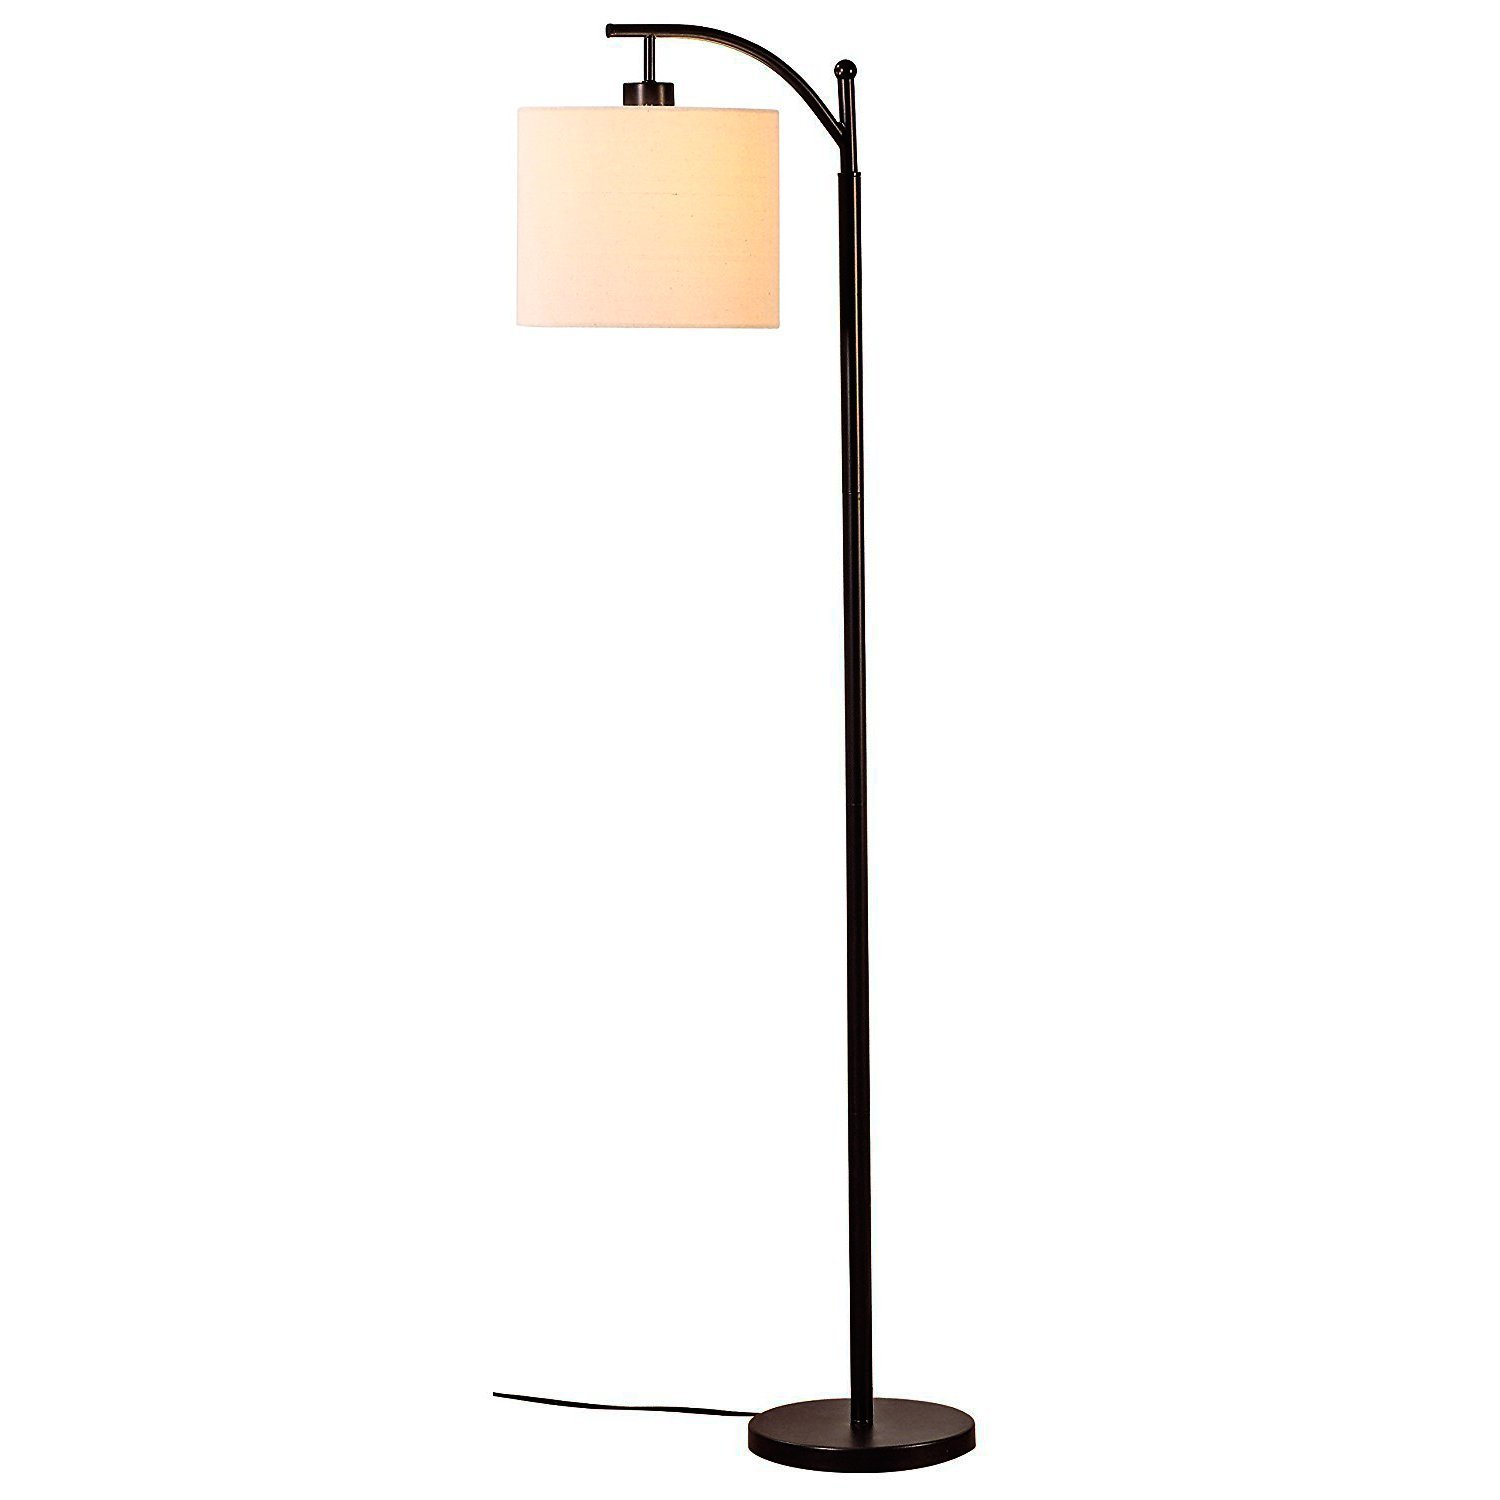 Inspirations Holmo Floor Lamp For Cool Interior Lighting in sizing 1500 X 1500